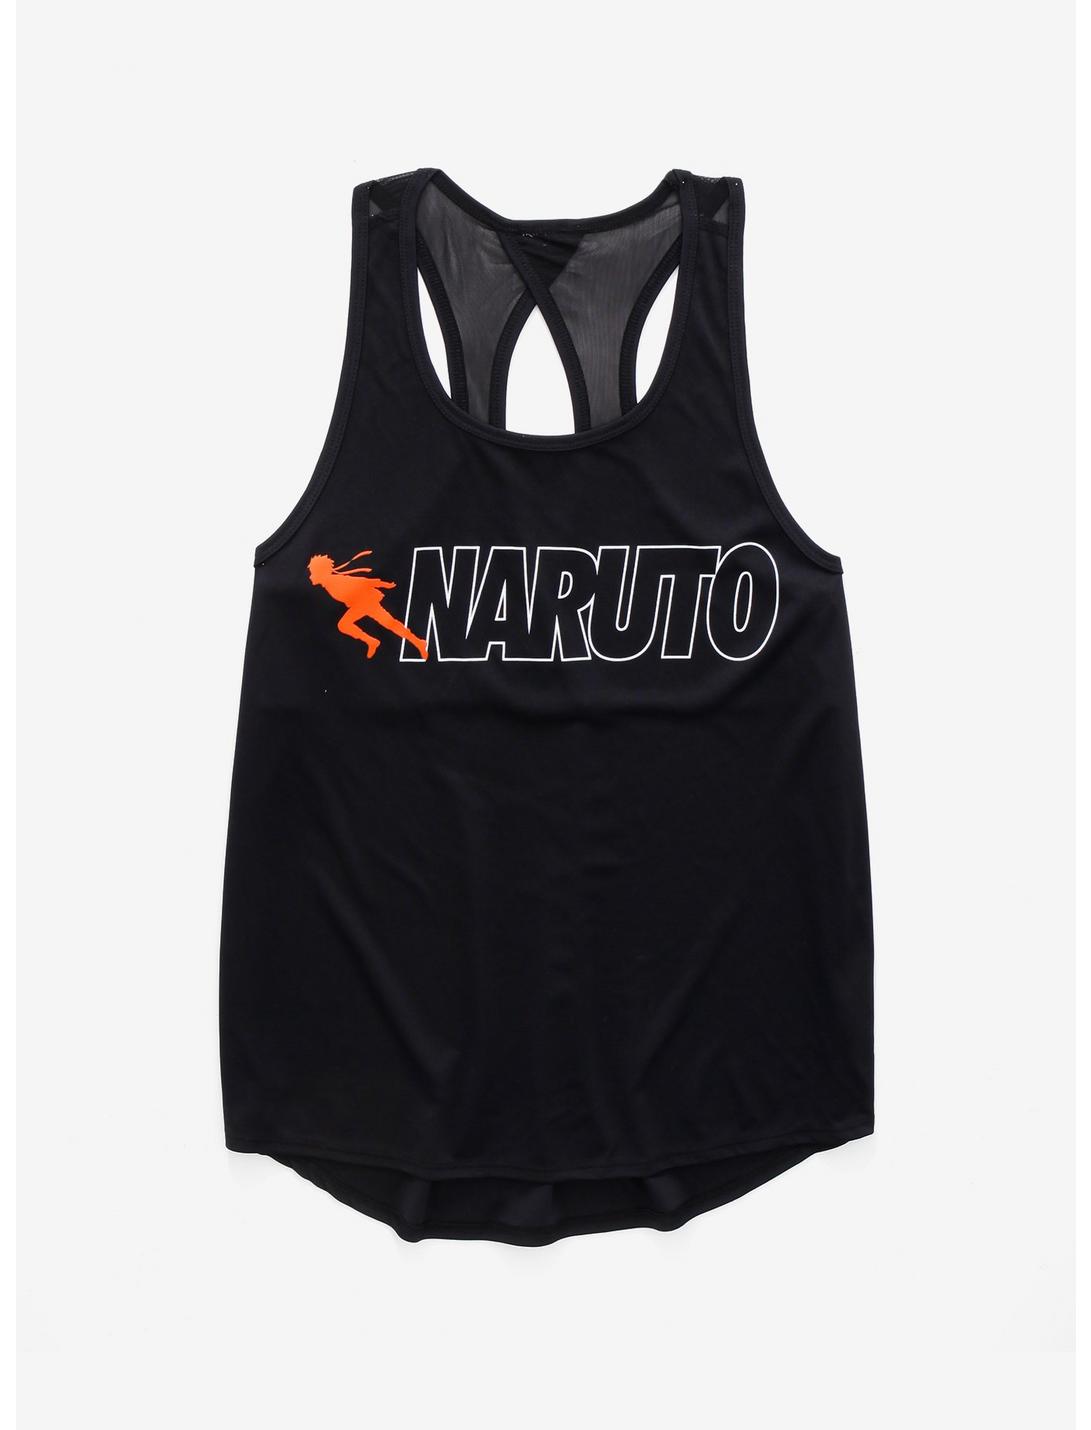 Naruto Running Athletic Women's Tank Top - BoxLunch Exclusive, BLACK, hi-res